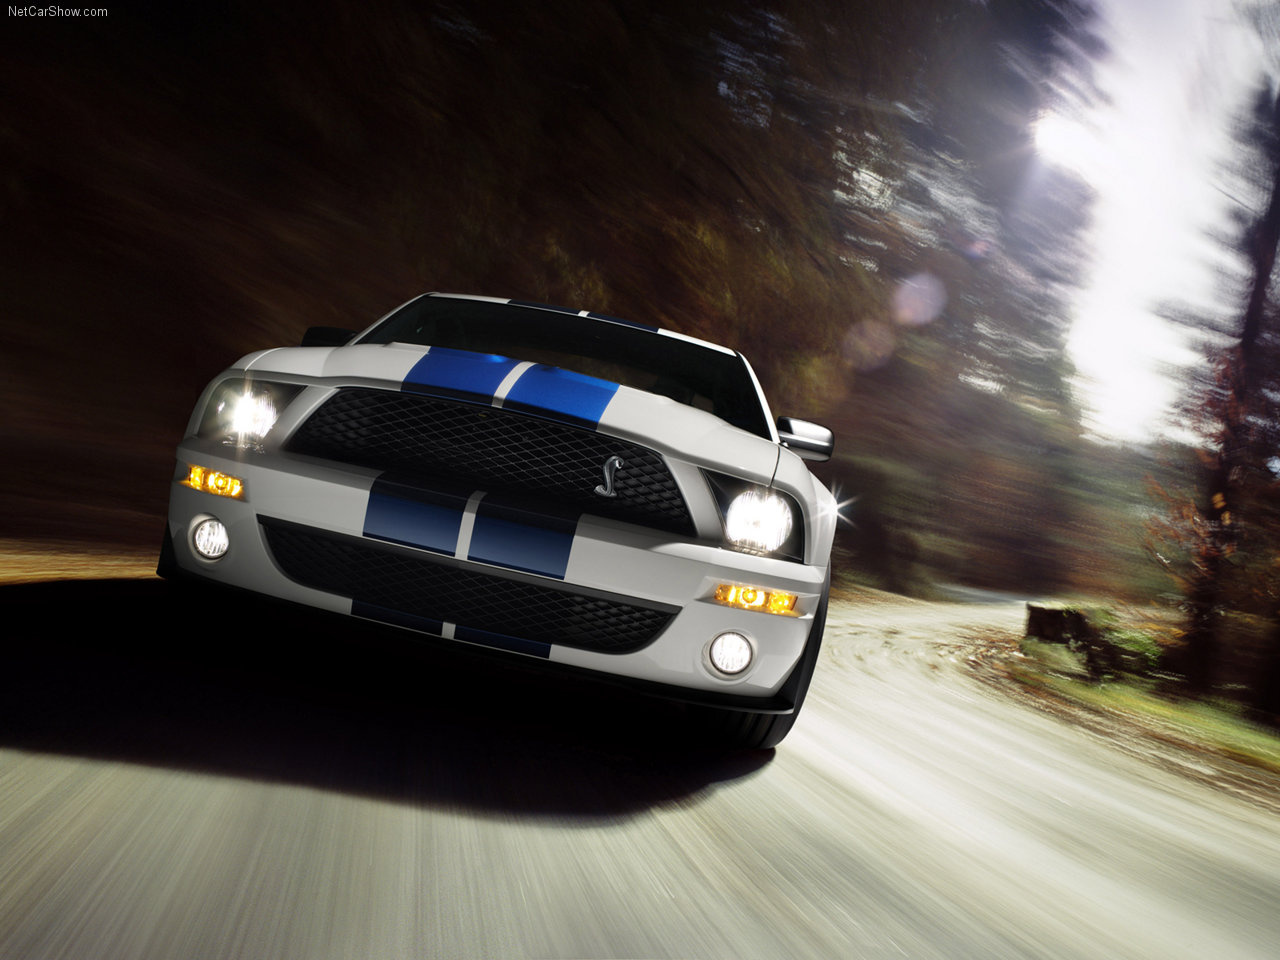 Ford-Mustang Shelby GT500 2007 1280x960 wallpaper 04